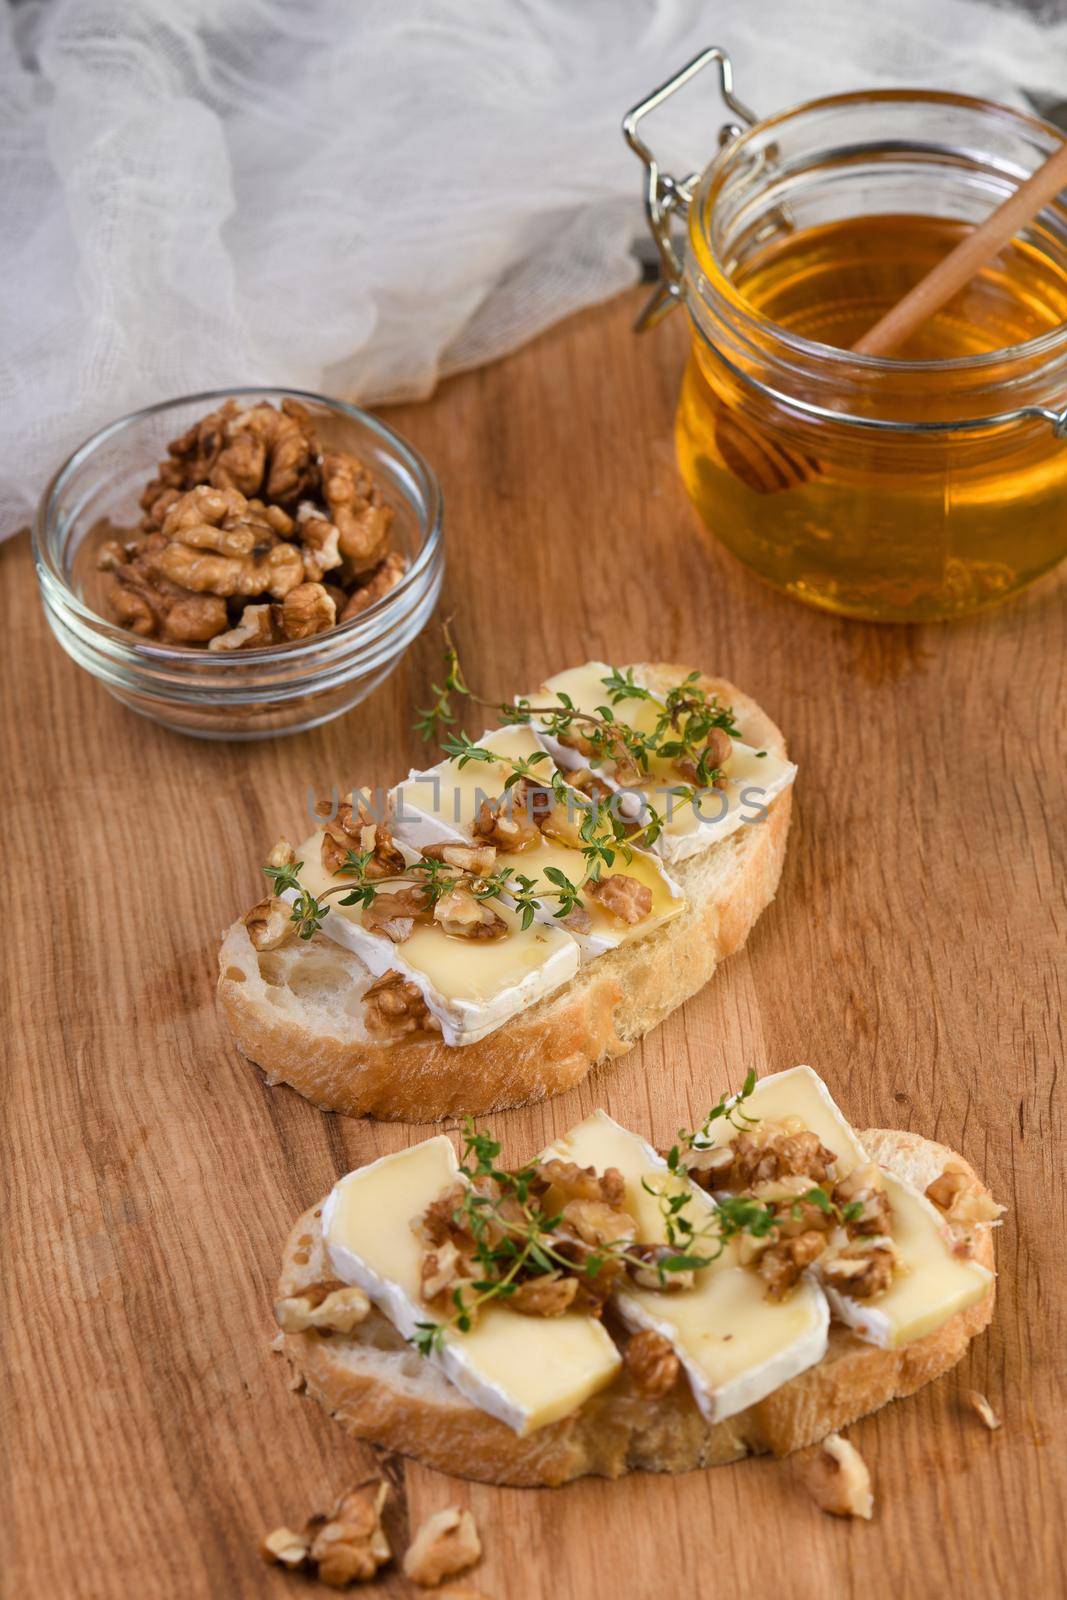 Open sandwiches with soft brie cheese and thyme, honey and nuts on a wooden board